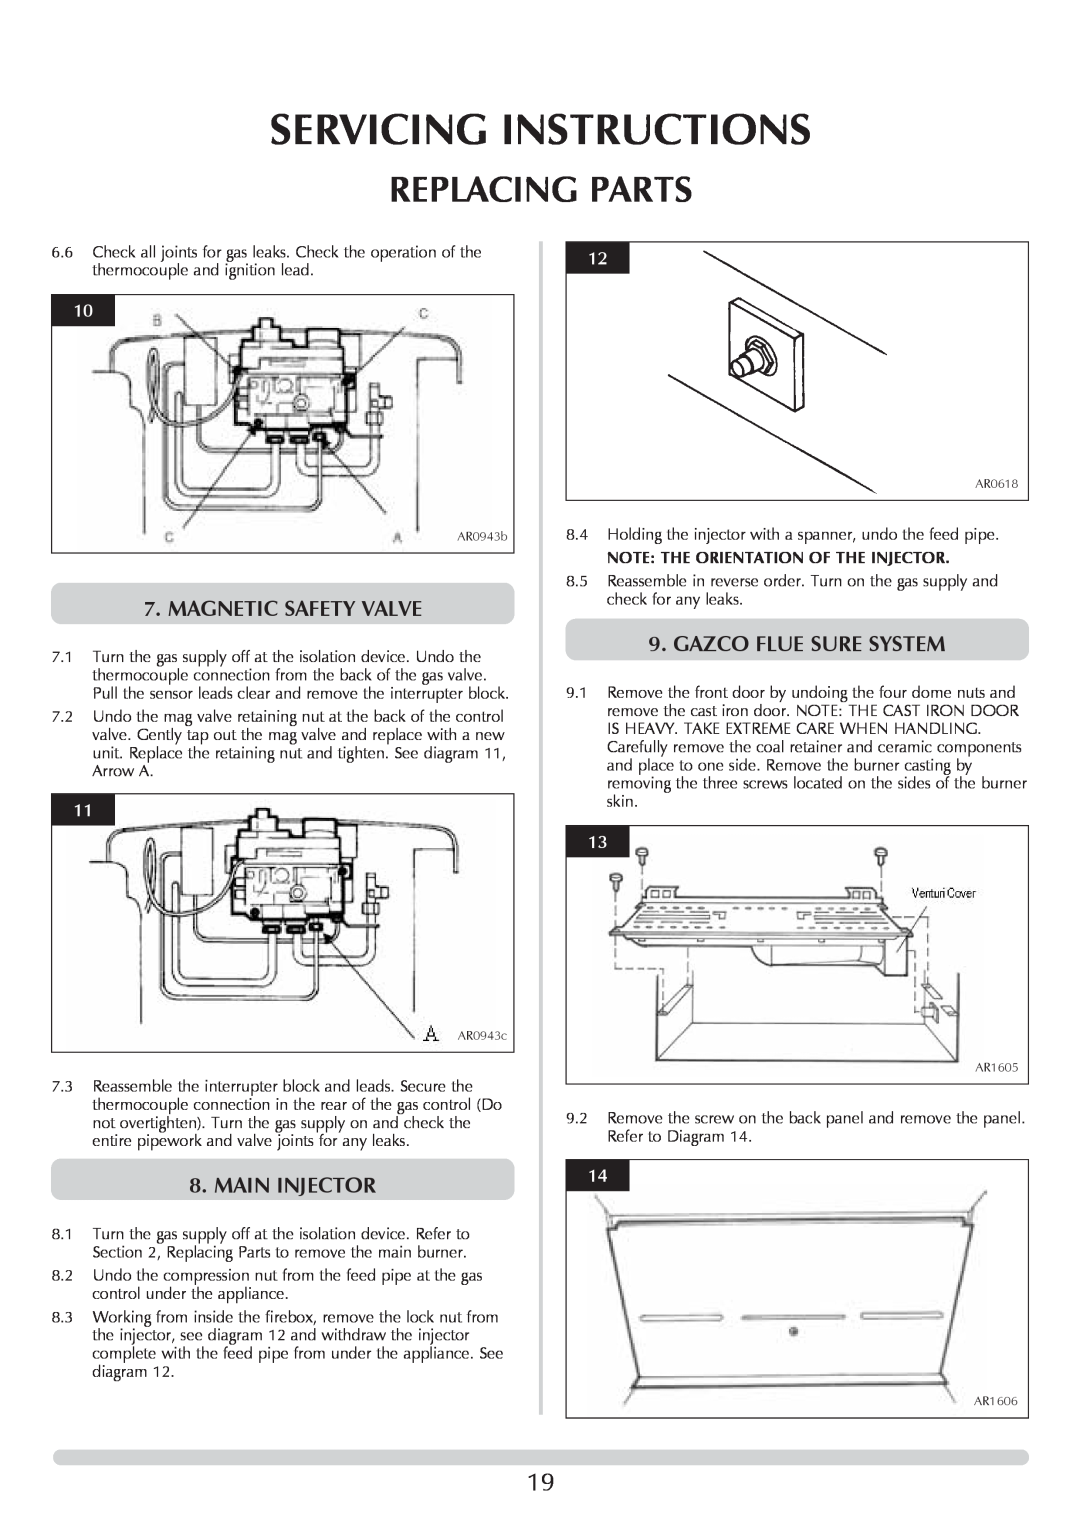 Stovax Stove Range Servicing Instructions, Replacing Parts, Magnetic Safety Valve, Main Injector, Gazco Flue Sure System 